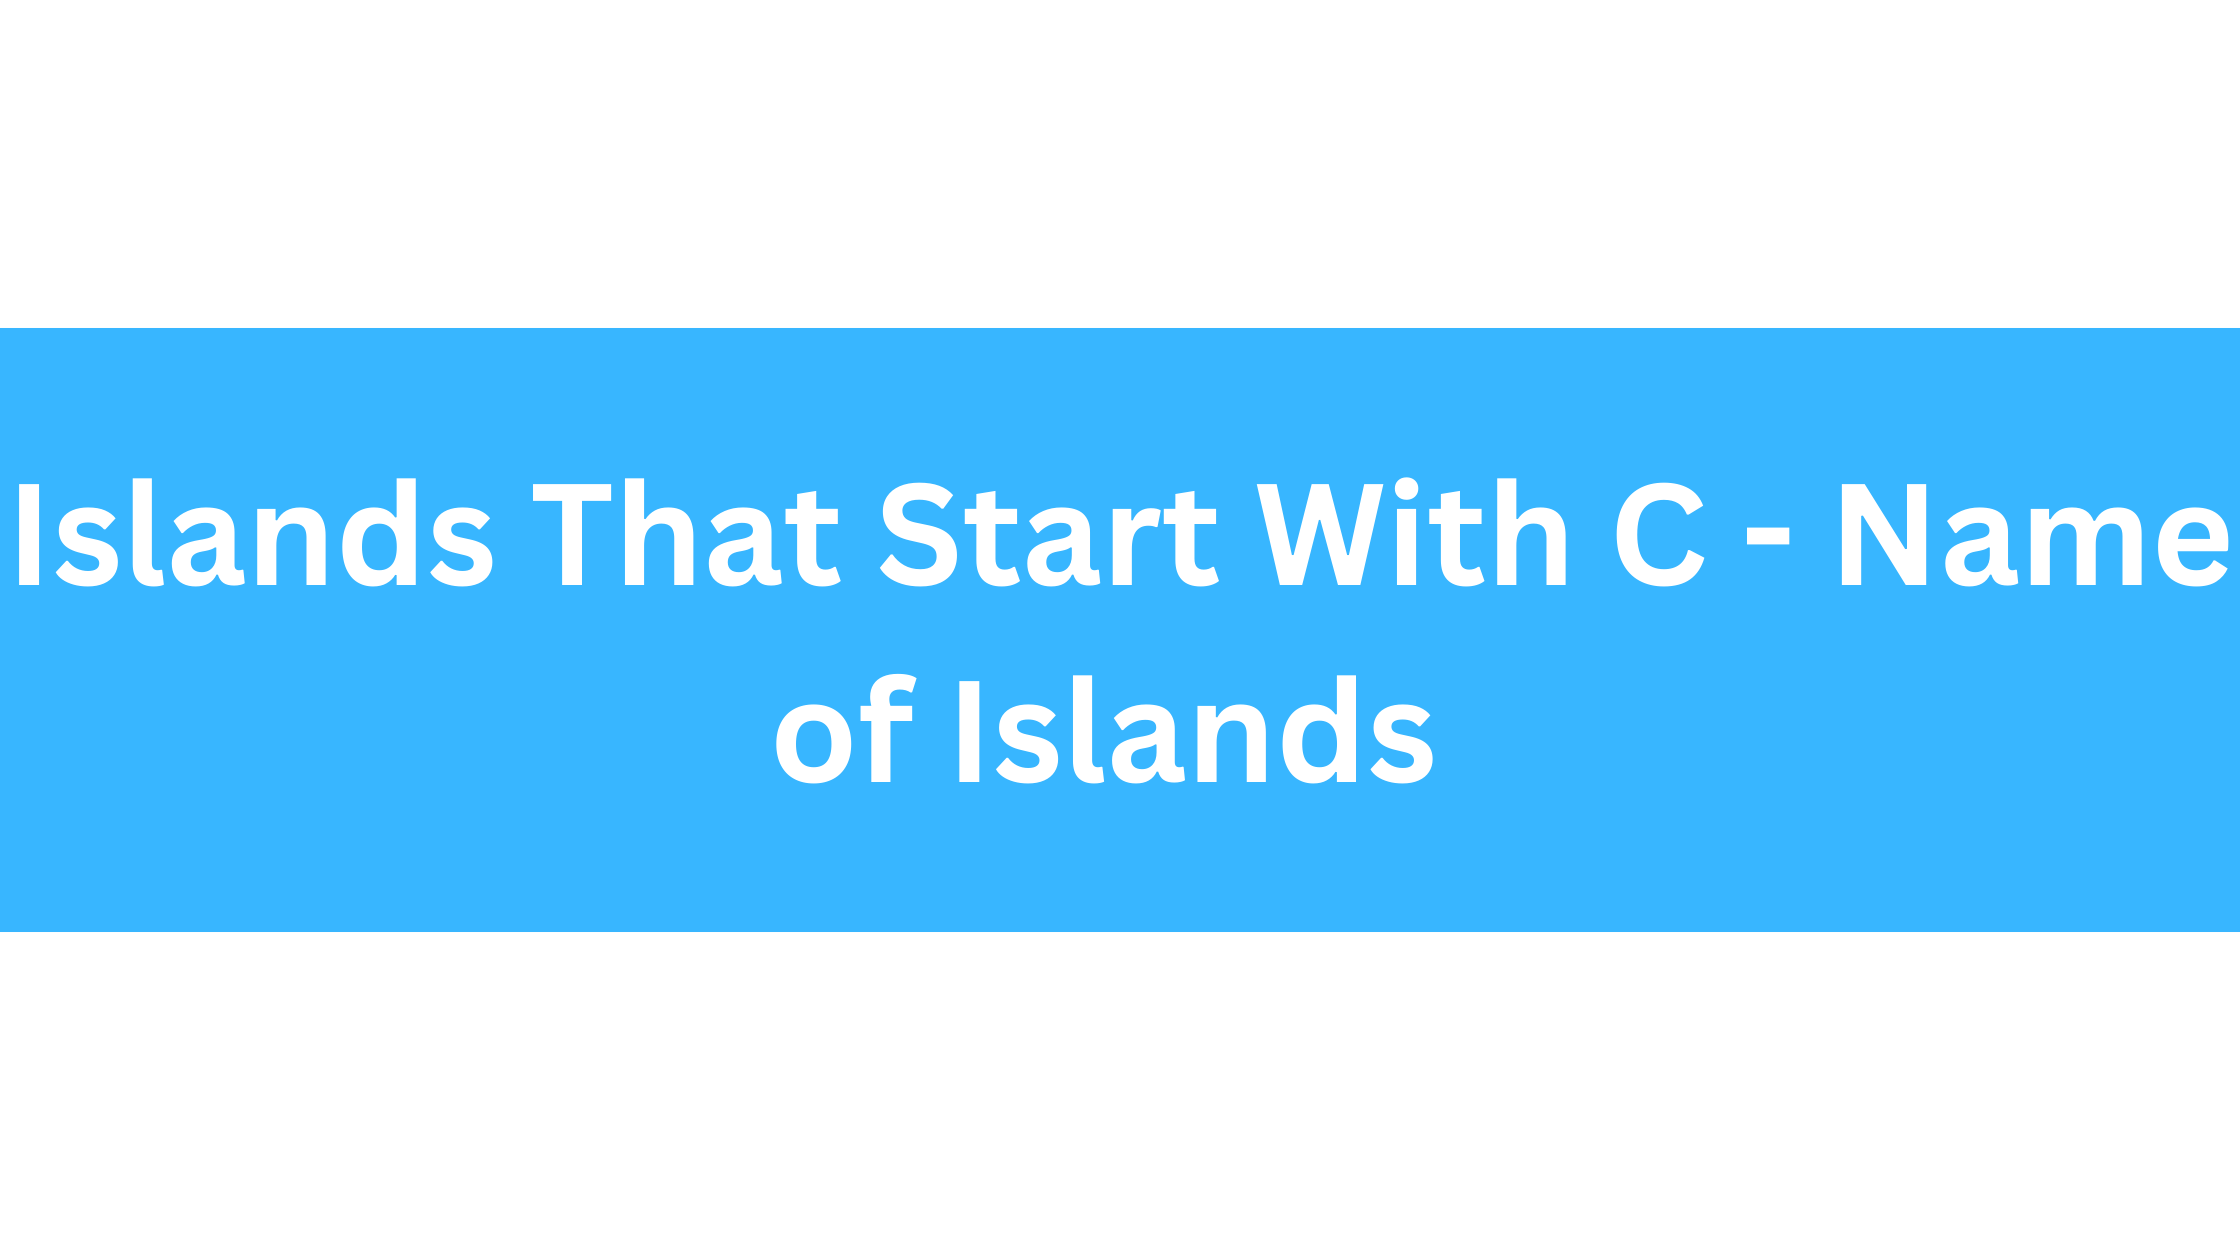 Islands That Start With C